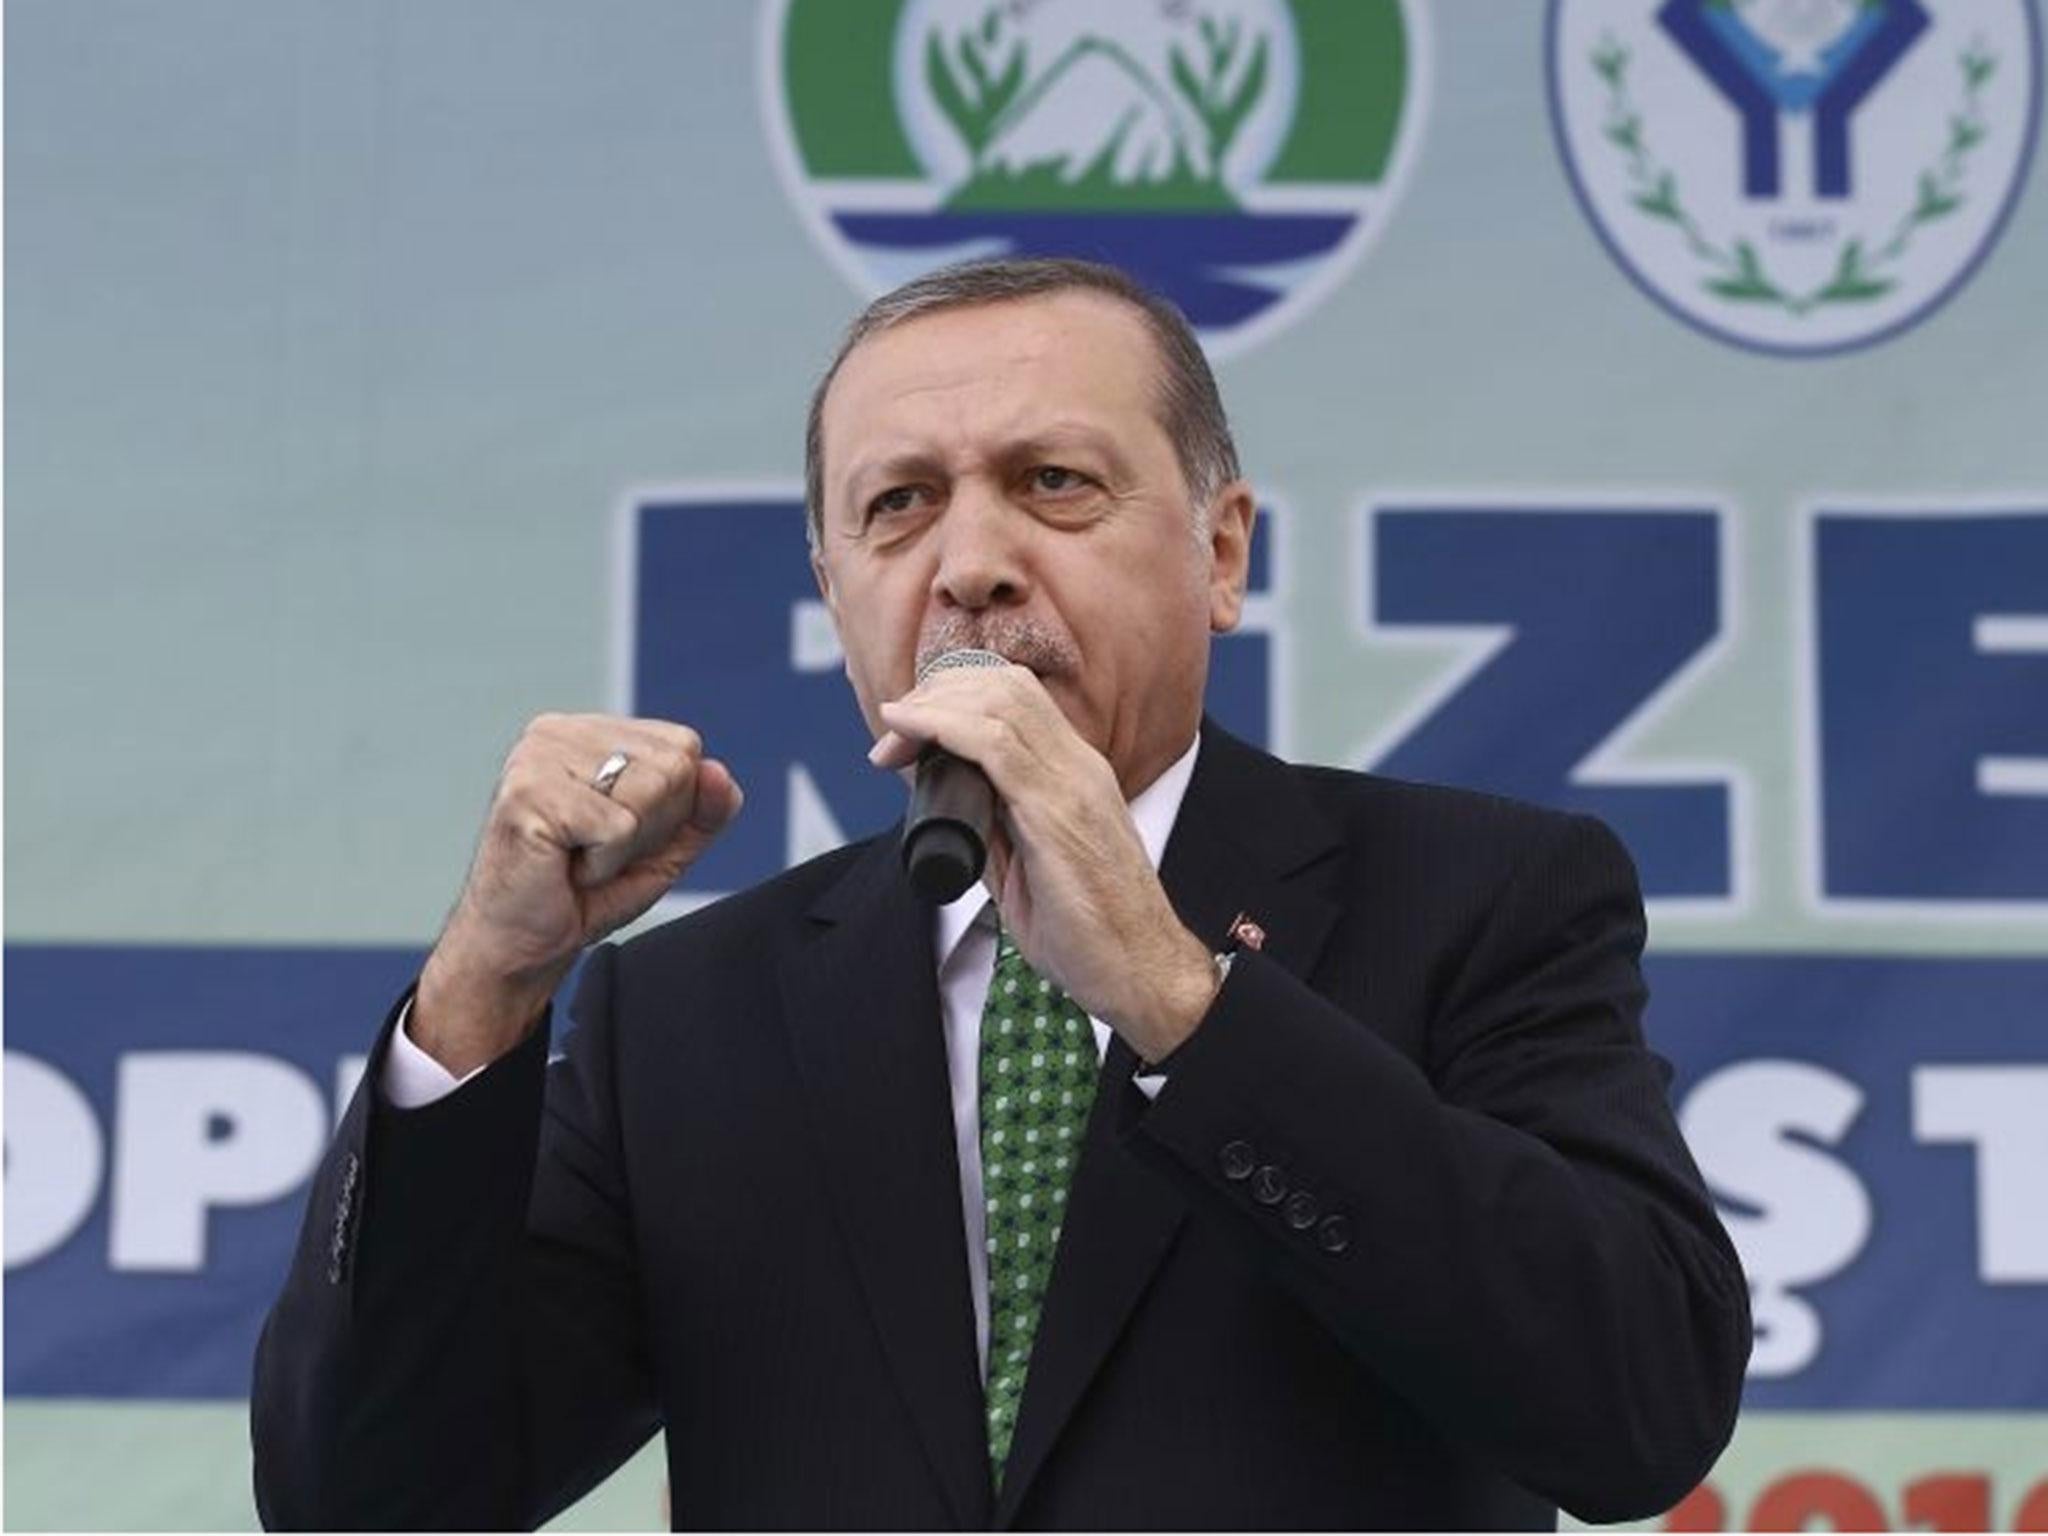 Turkish President Recep Tayyip Erdogan addresses his supporters in his hometown of Rize, on the Black Sea coast of Turkey, Saturday, 15 October, 2016